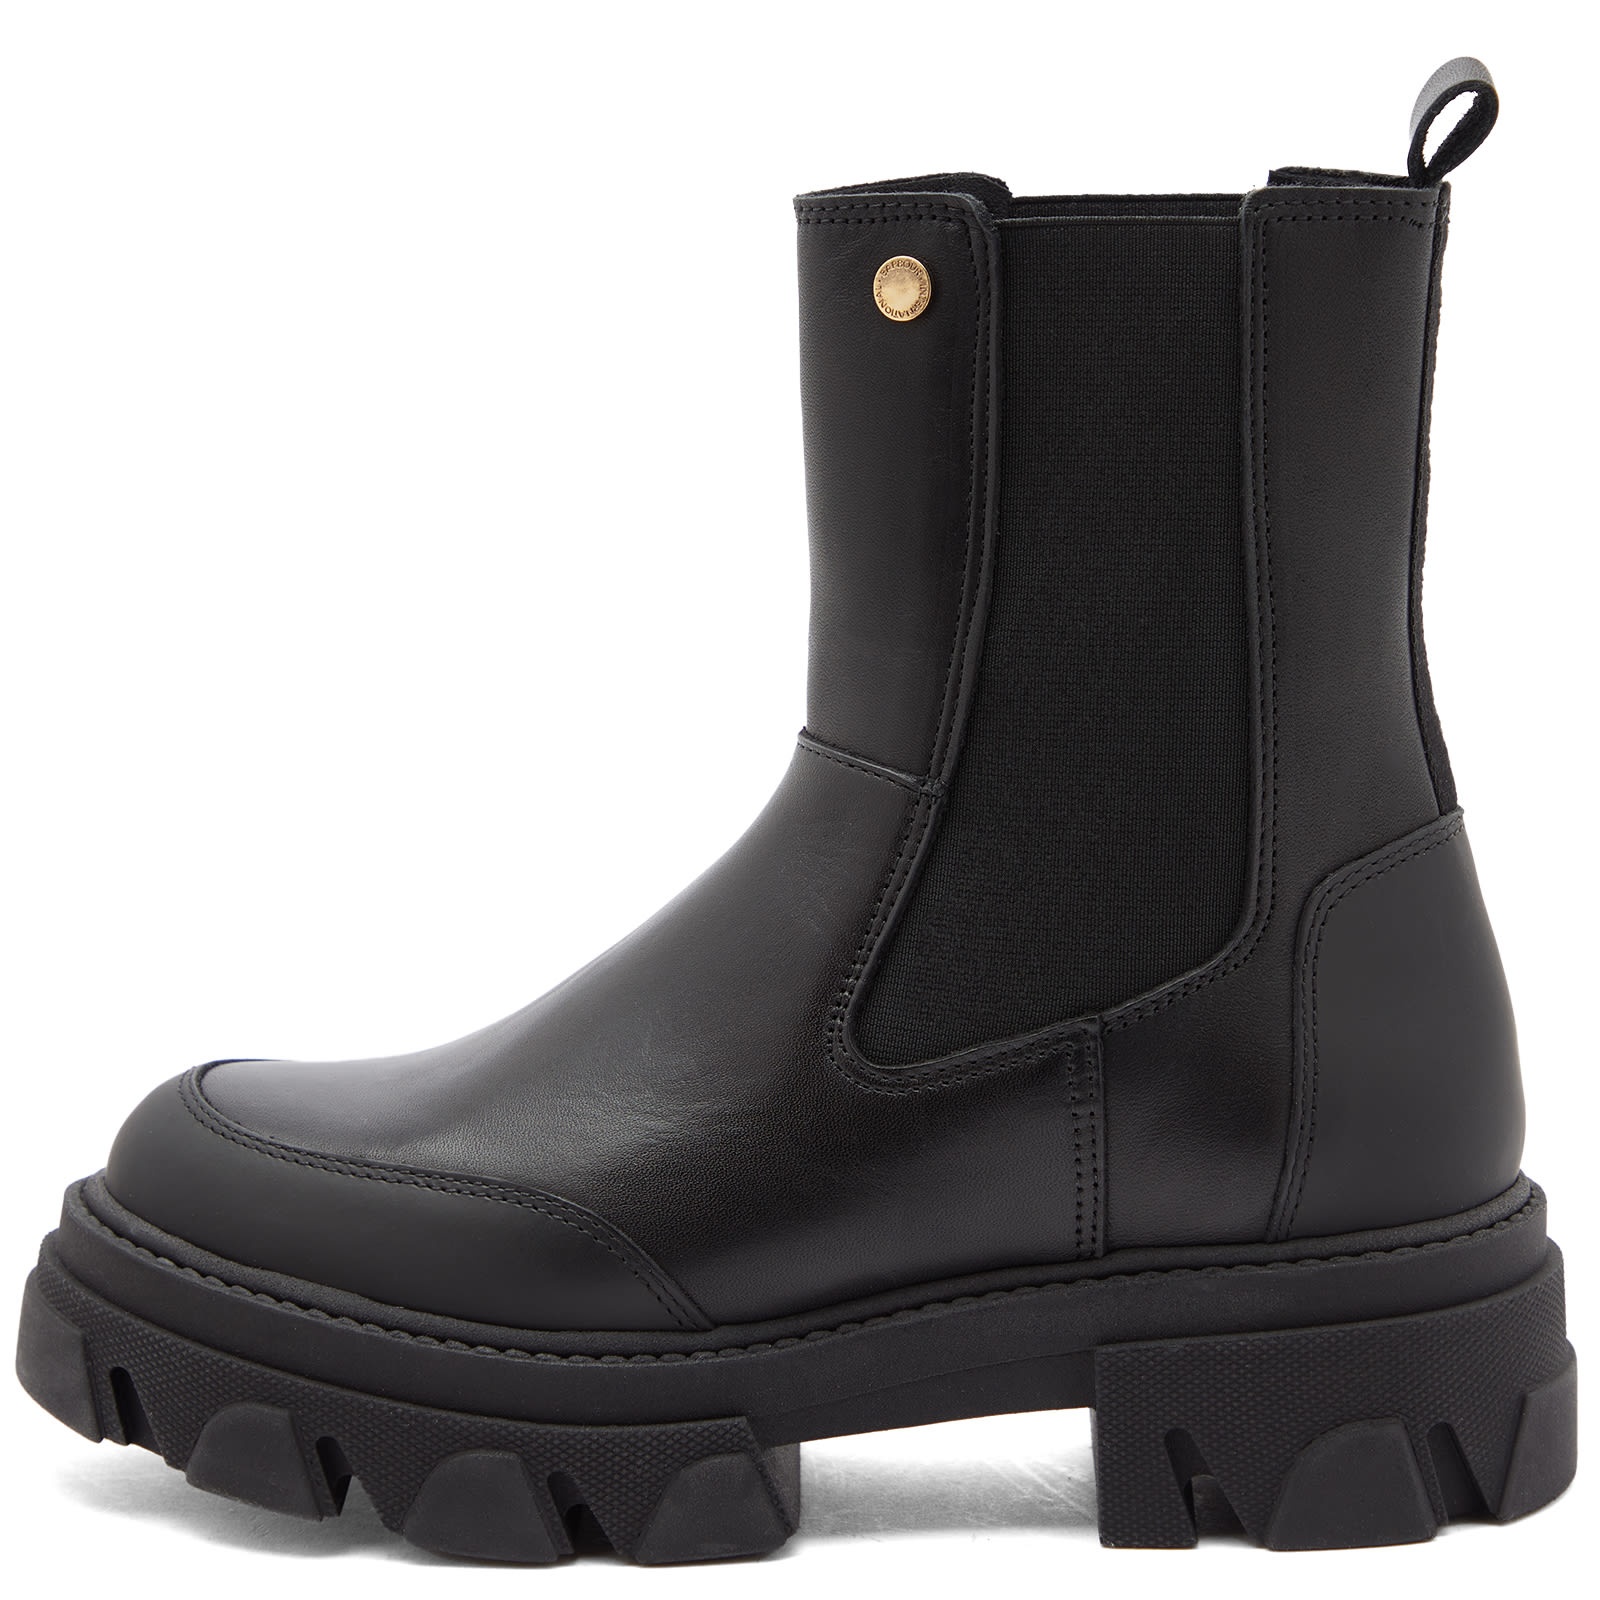 Barbour International Chicane Ankle Boots - 2